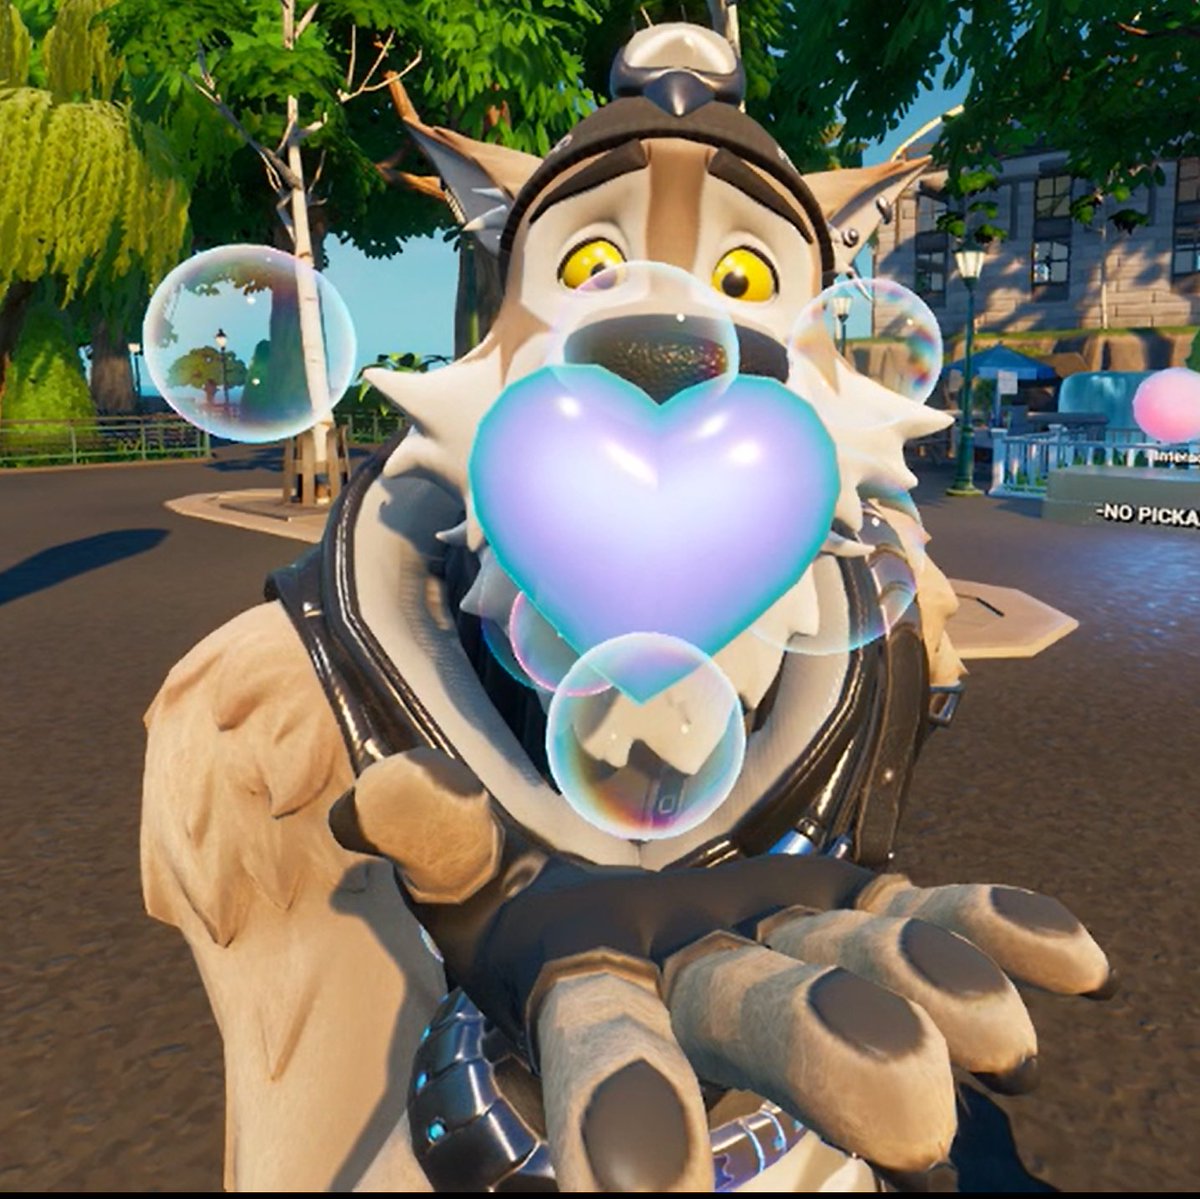 Wendell got y'all a gift! Hes hoping everyone are having a great day!!
#fotnite #FortniteMega #FortniteChapter4Season2 #furry